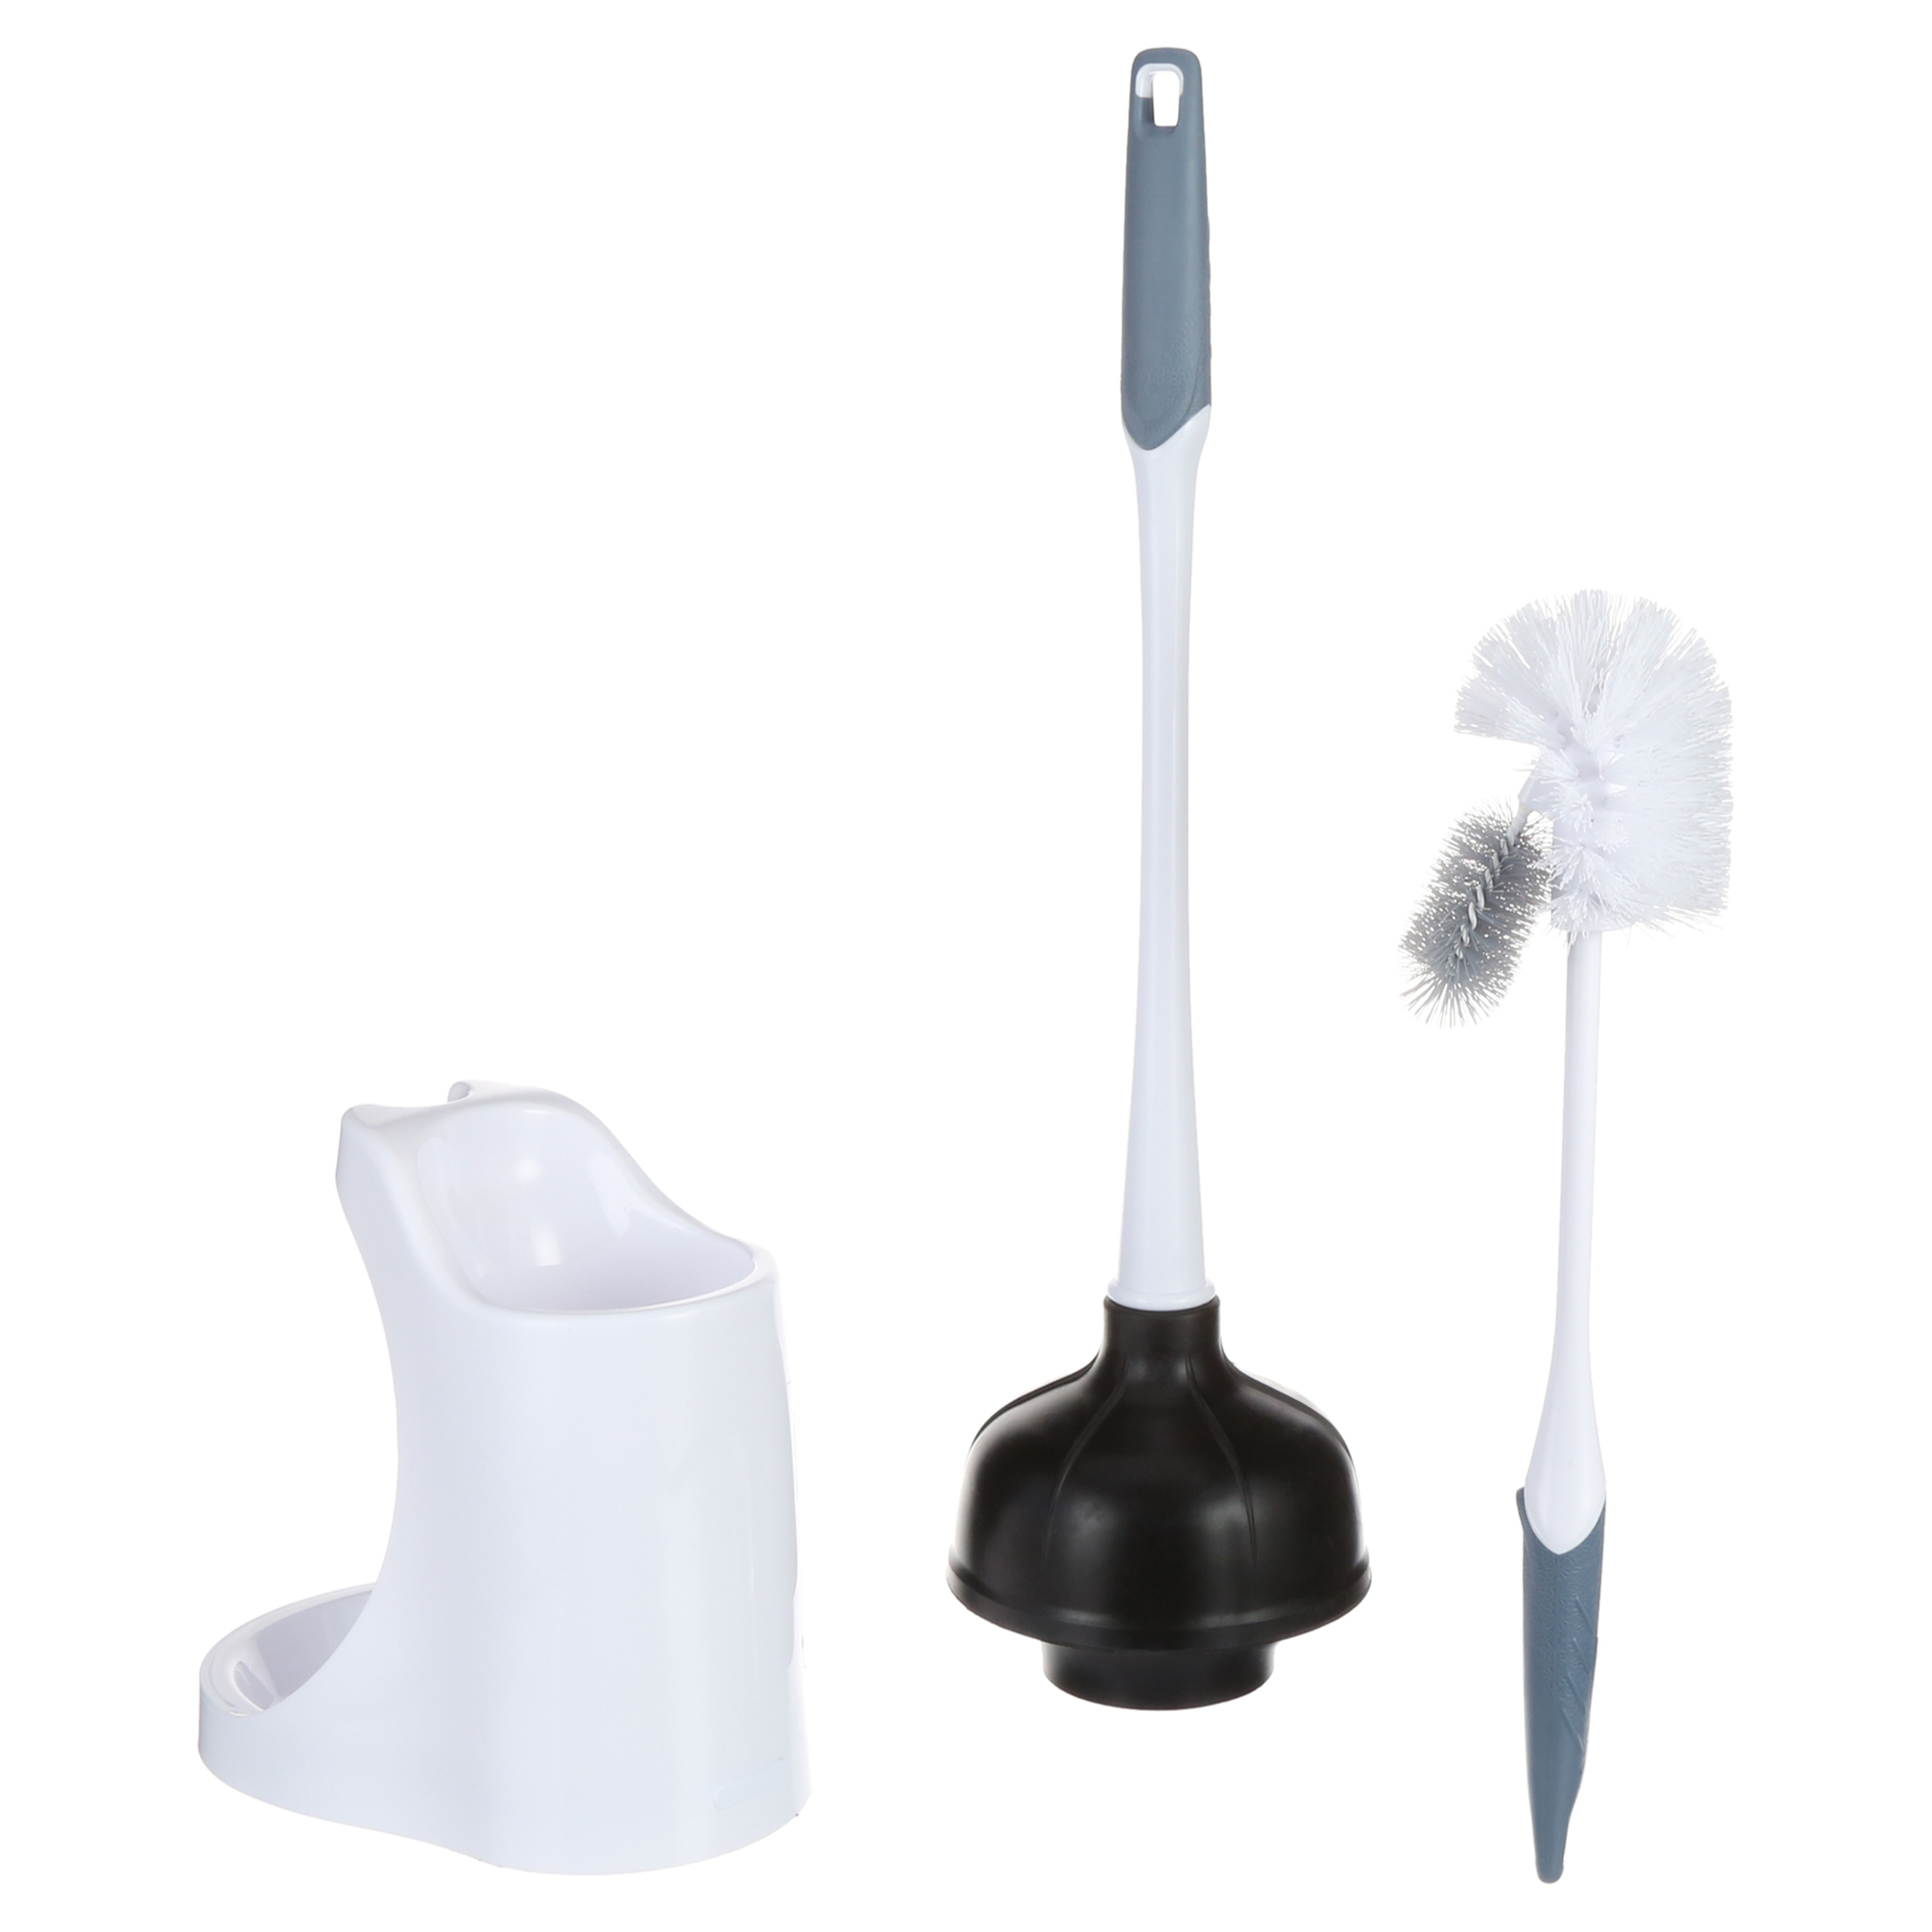 Great Value Bowl Brush Plunger & Caddy - image 1 of 5